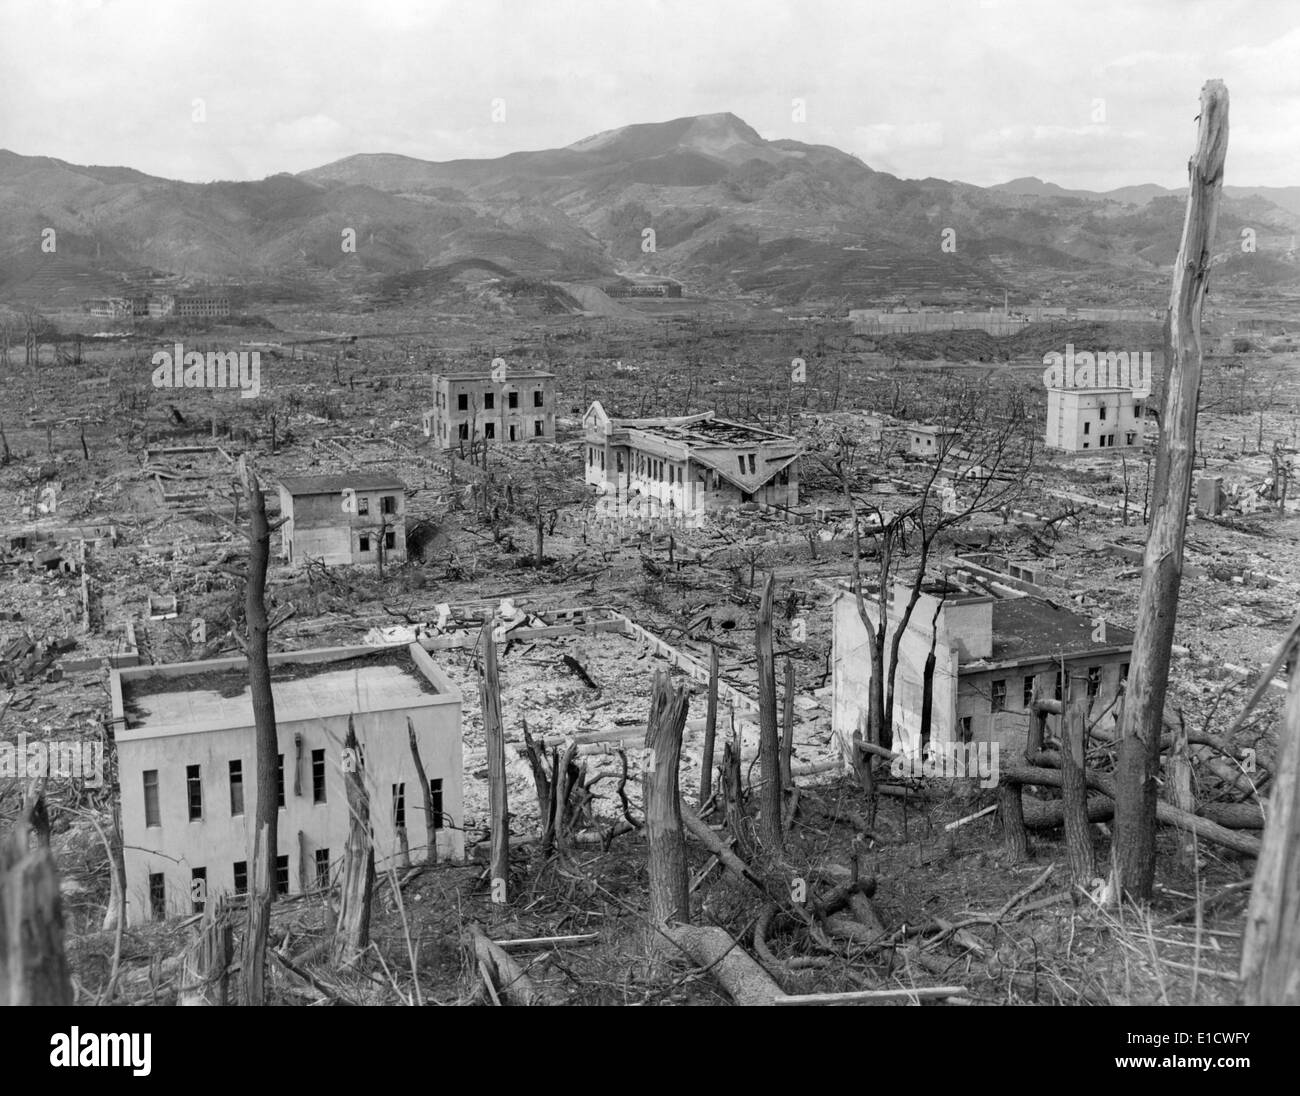 Ruins Of Nagasaki Japan After Atomic Bombing Of August 9 1945 As Seen From A Hillside Opposite The Nagasaki Hospital In Stock Photo Alamy